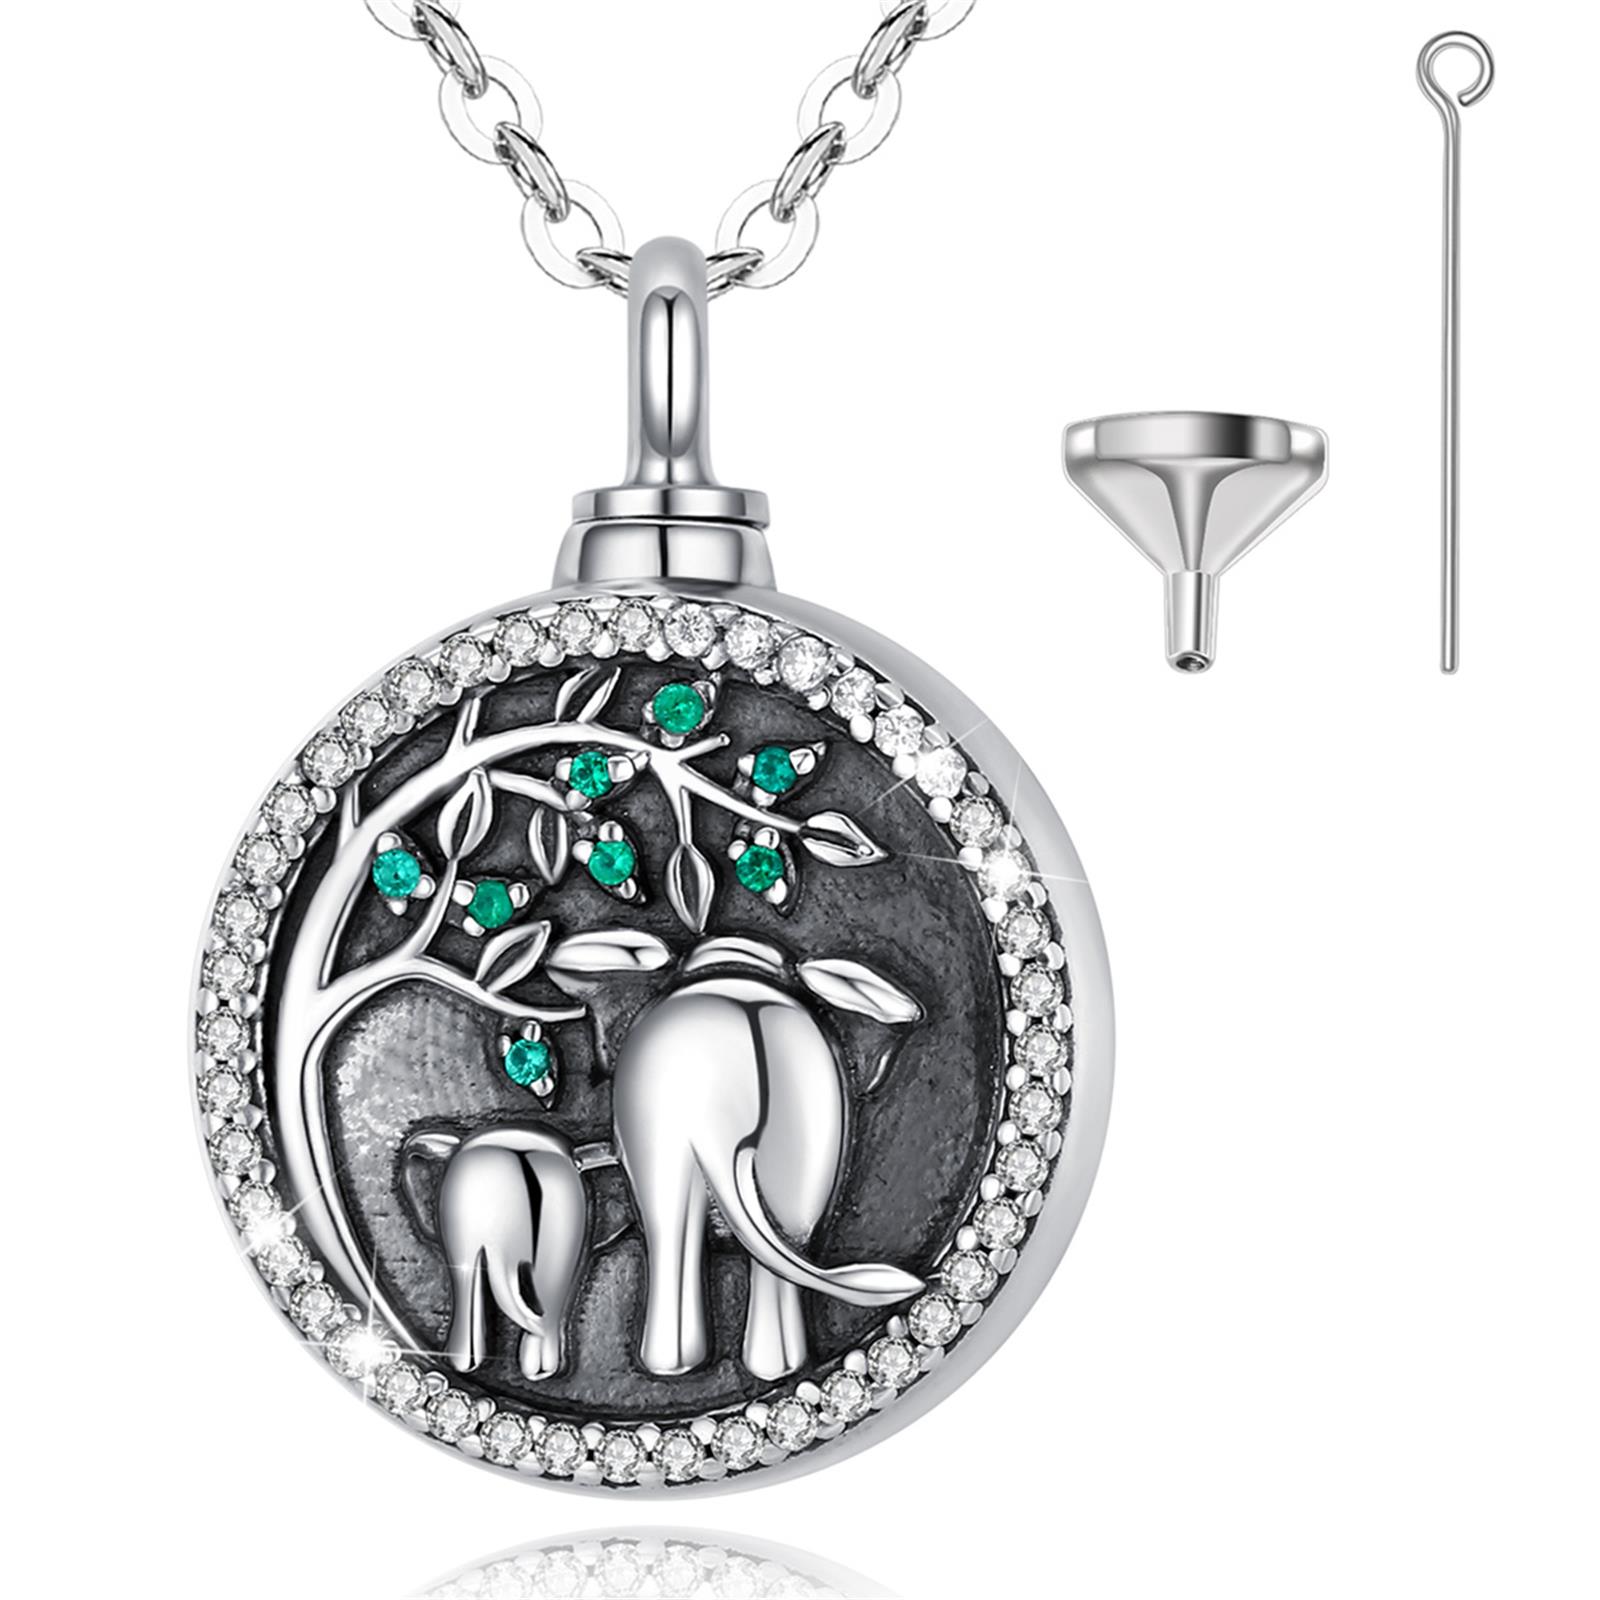 Merryshine New Female Elephant And Baby Elephant Design Cremation Jewelry 925 Sterling Silver Pendant Urn Necklace For Ashes